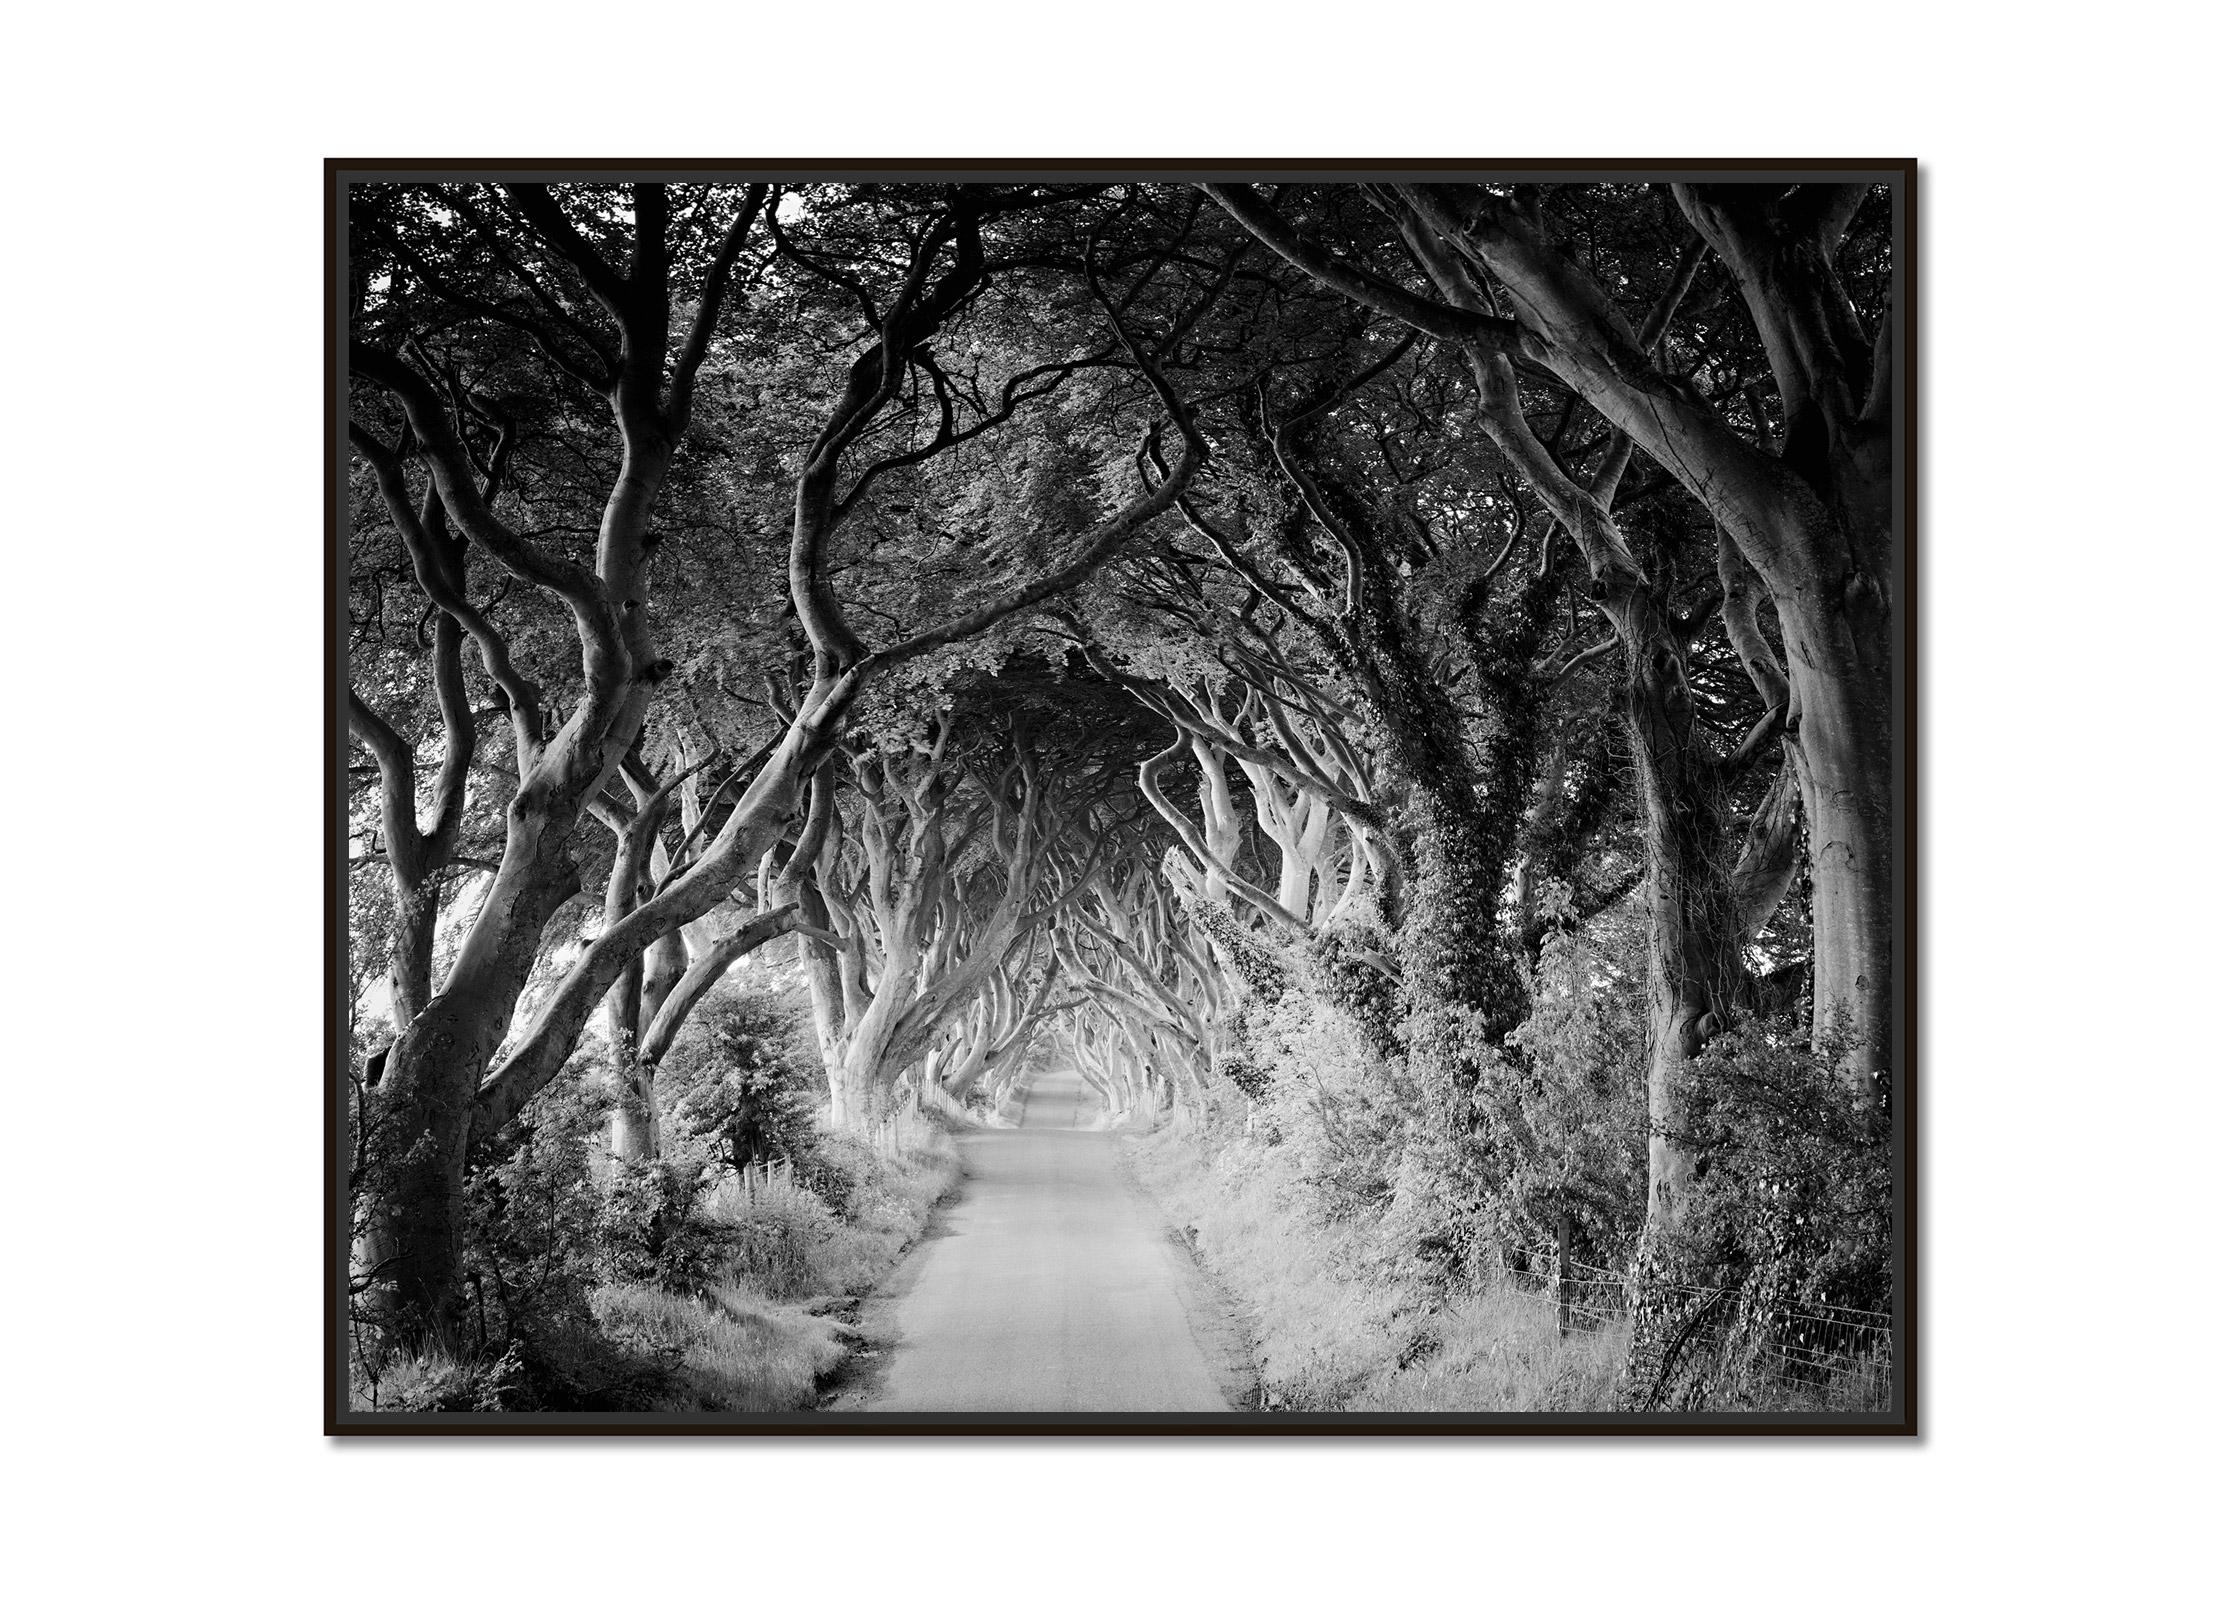 Dark Hedges, beech, trees, Ireland, black and white art landscape photography - Photograph by Gerald Berghammer